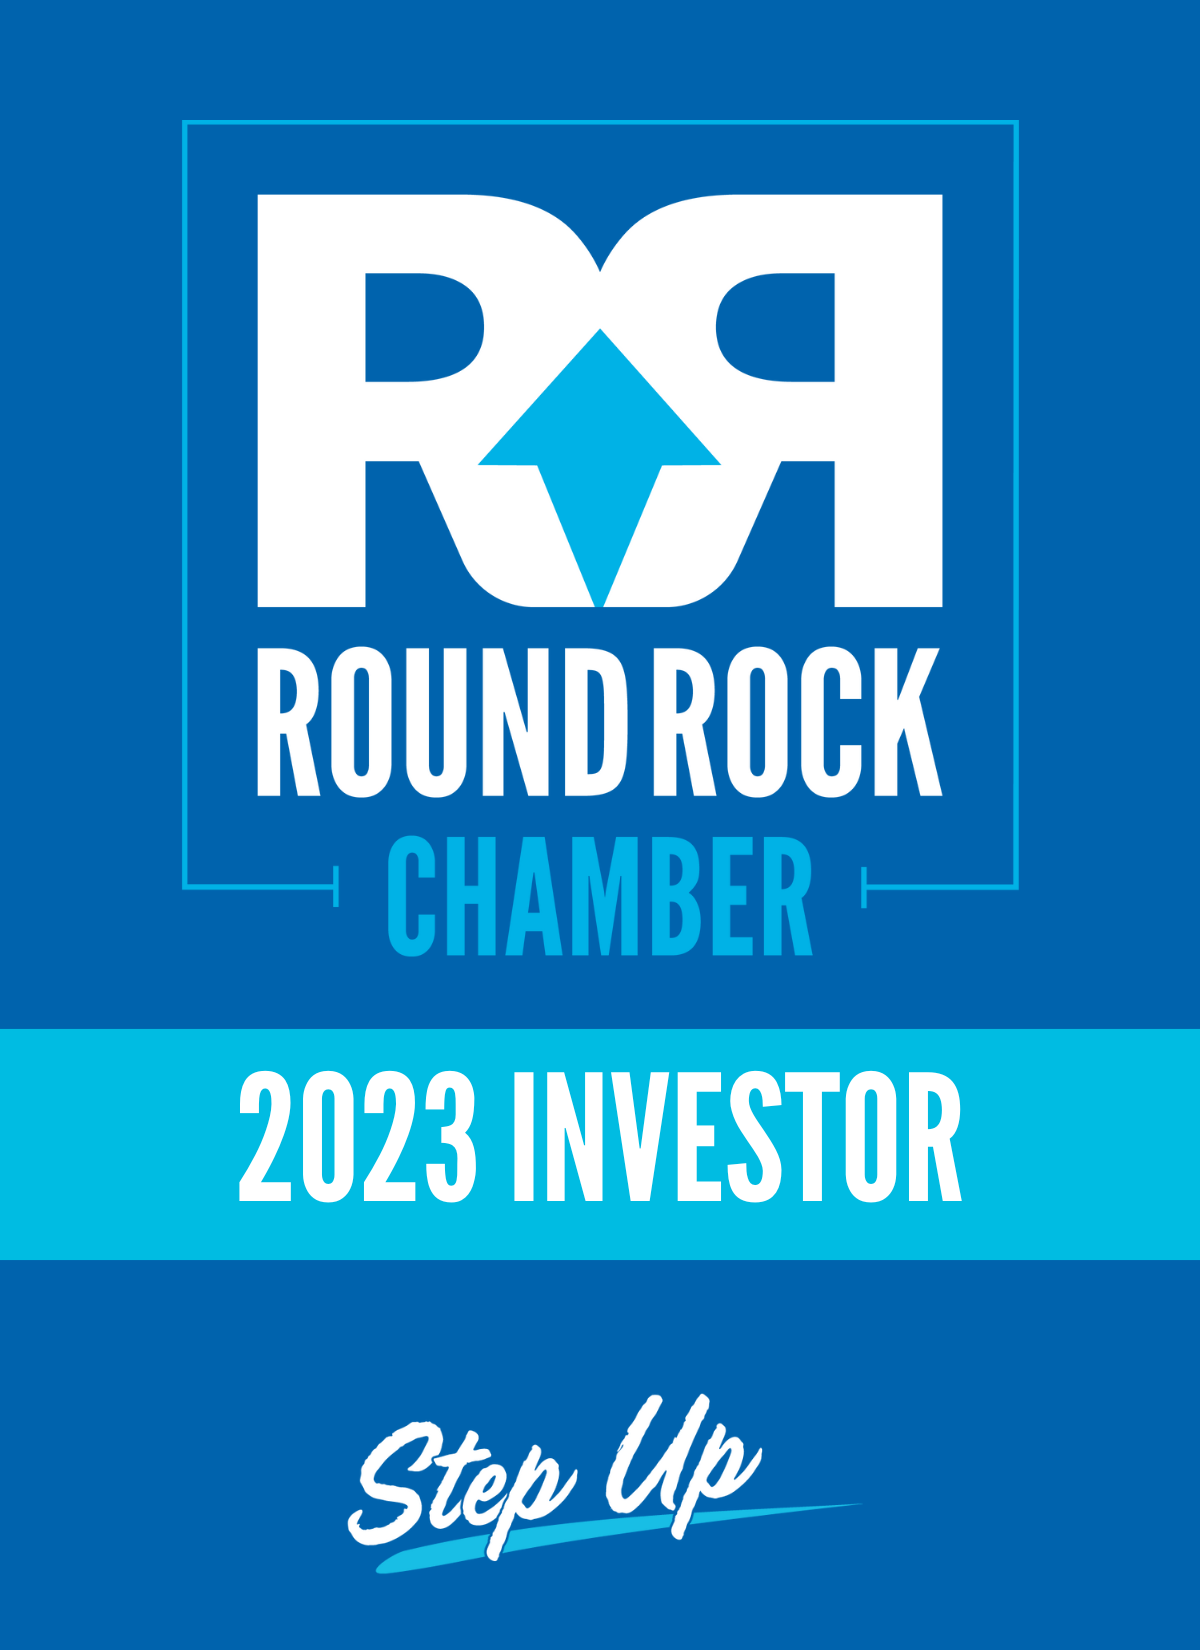 Round Rock Chamber of Commerce